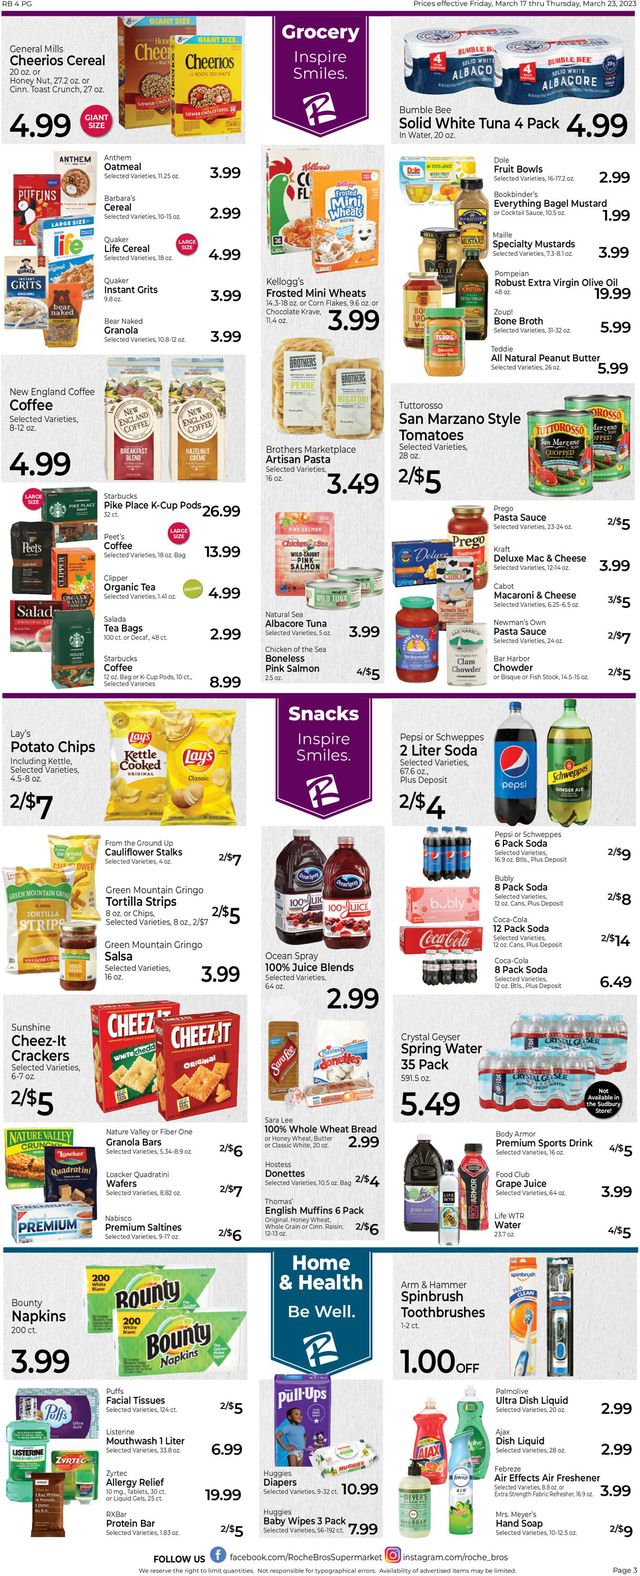 Roche Bros. Supermarkets Ad from 03/17/2023